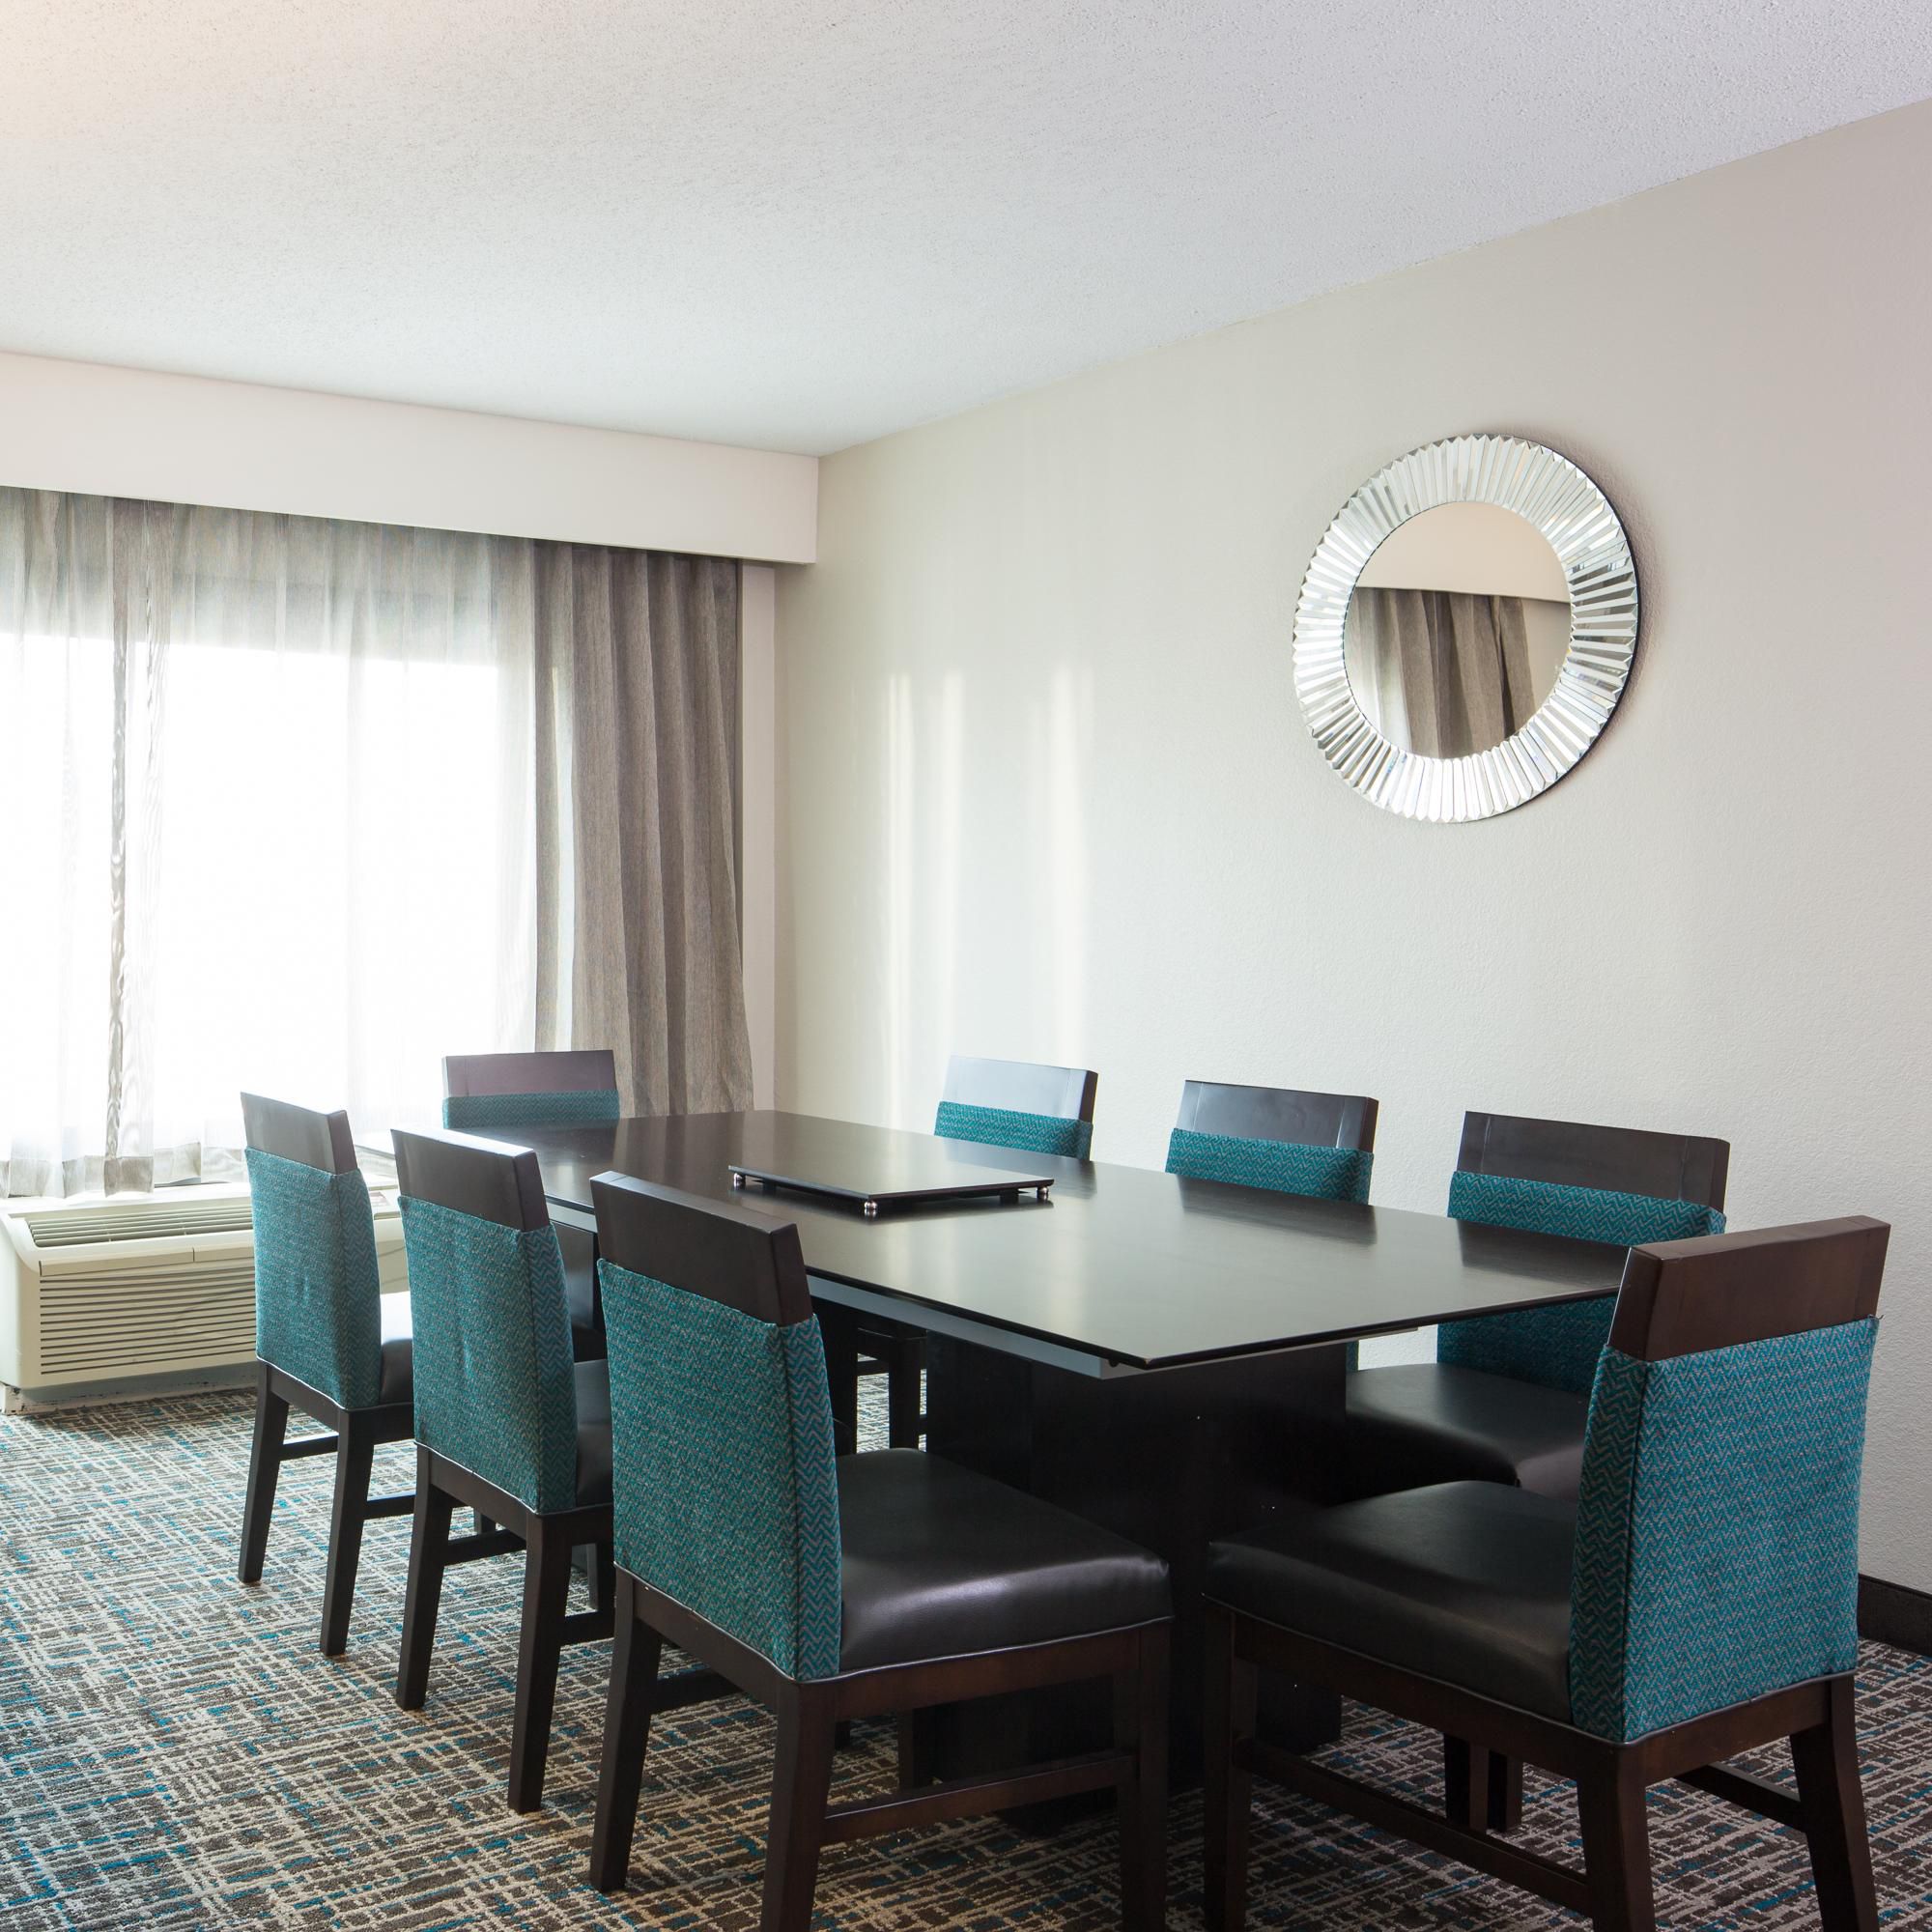 Look no further than the Crowne Plaza Memphis for a board meeting